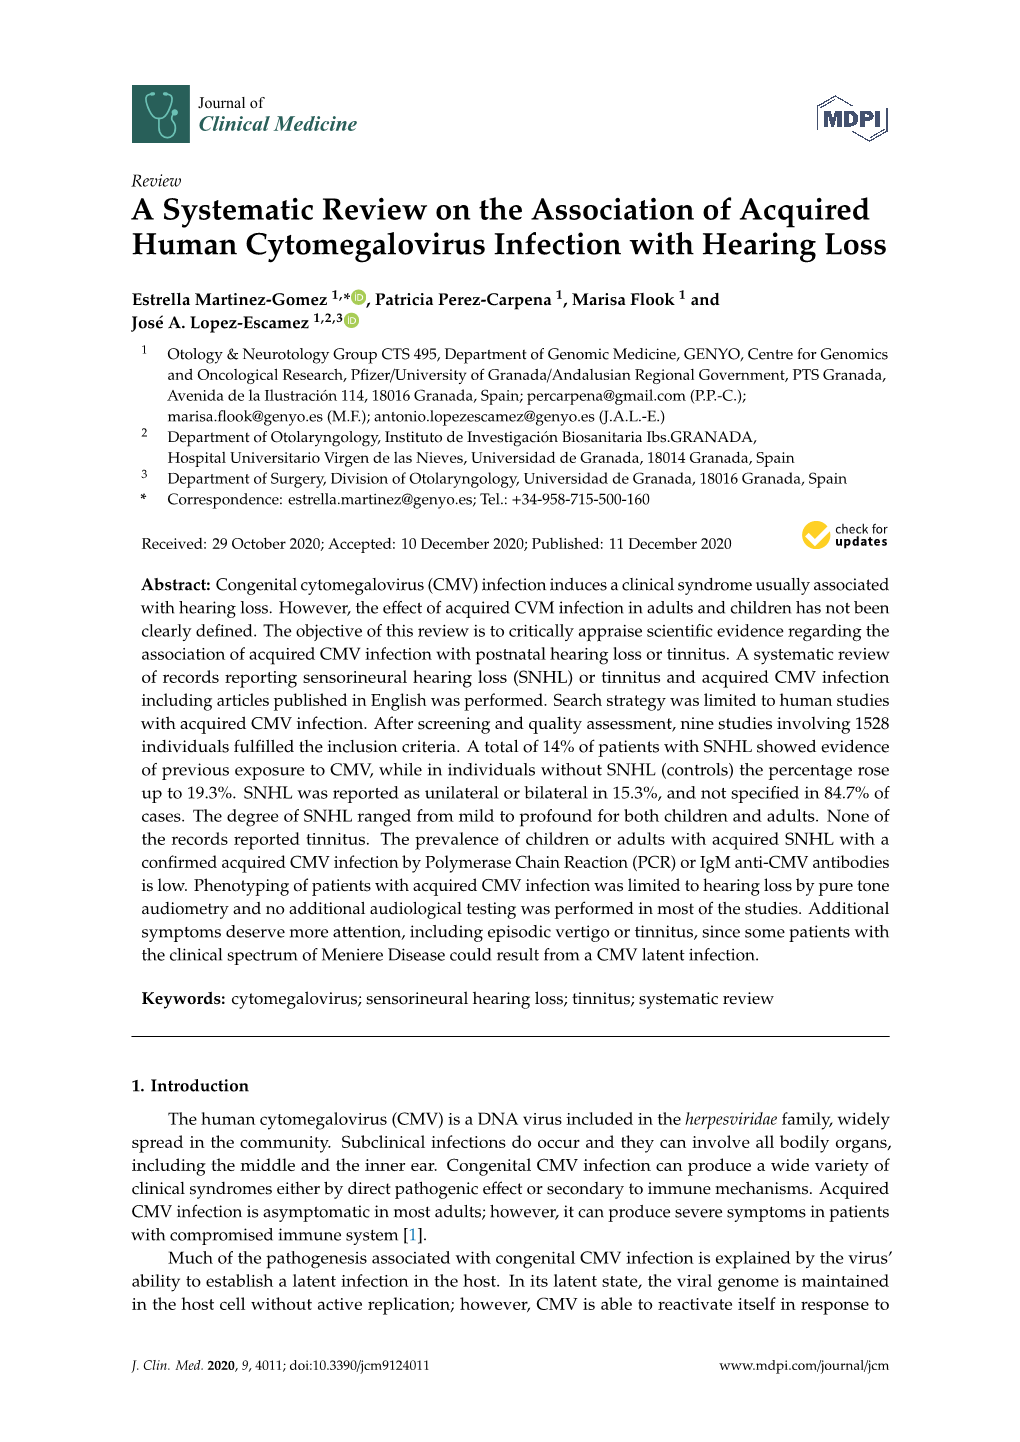 A Systematic Review on the Association of Acquired Human Cytomegalovirus Infection with Hearing Loss